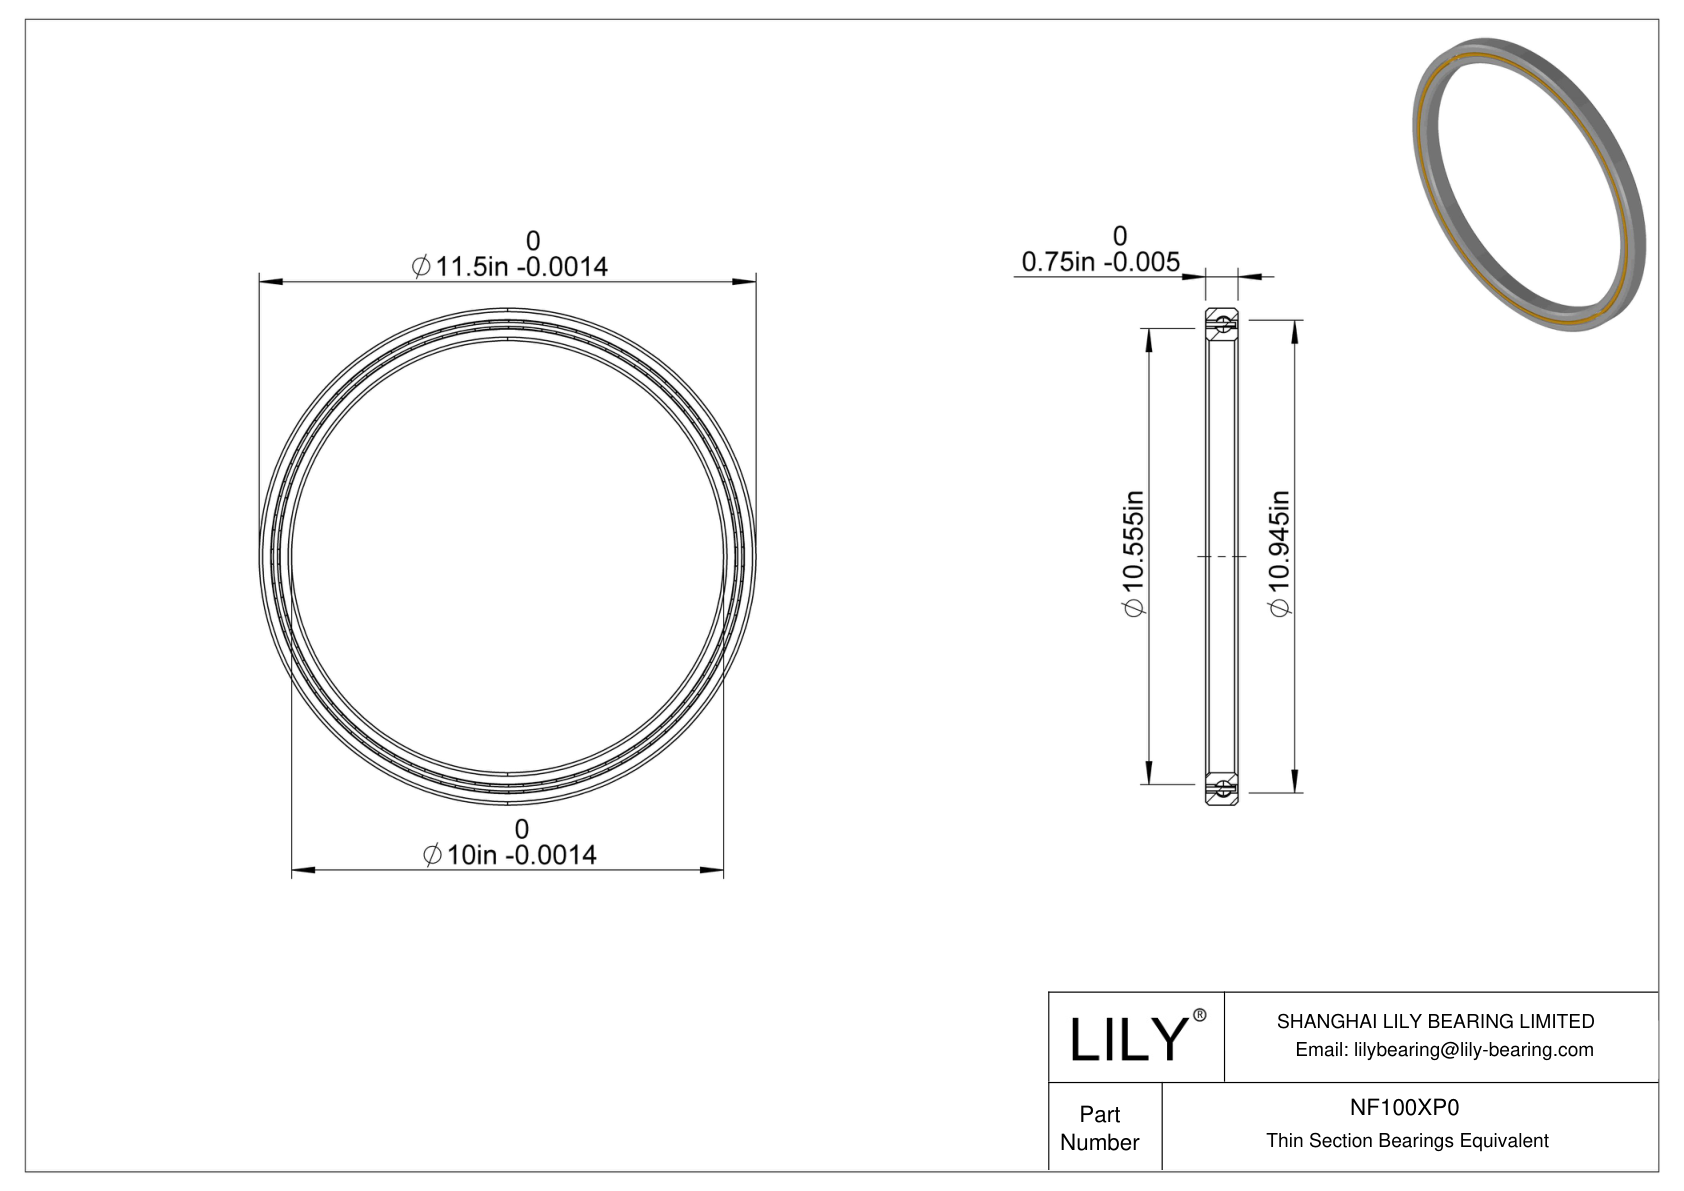 NF100XP0 Constant Section (CS) Bearings cad drawing